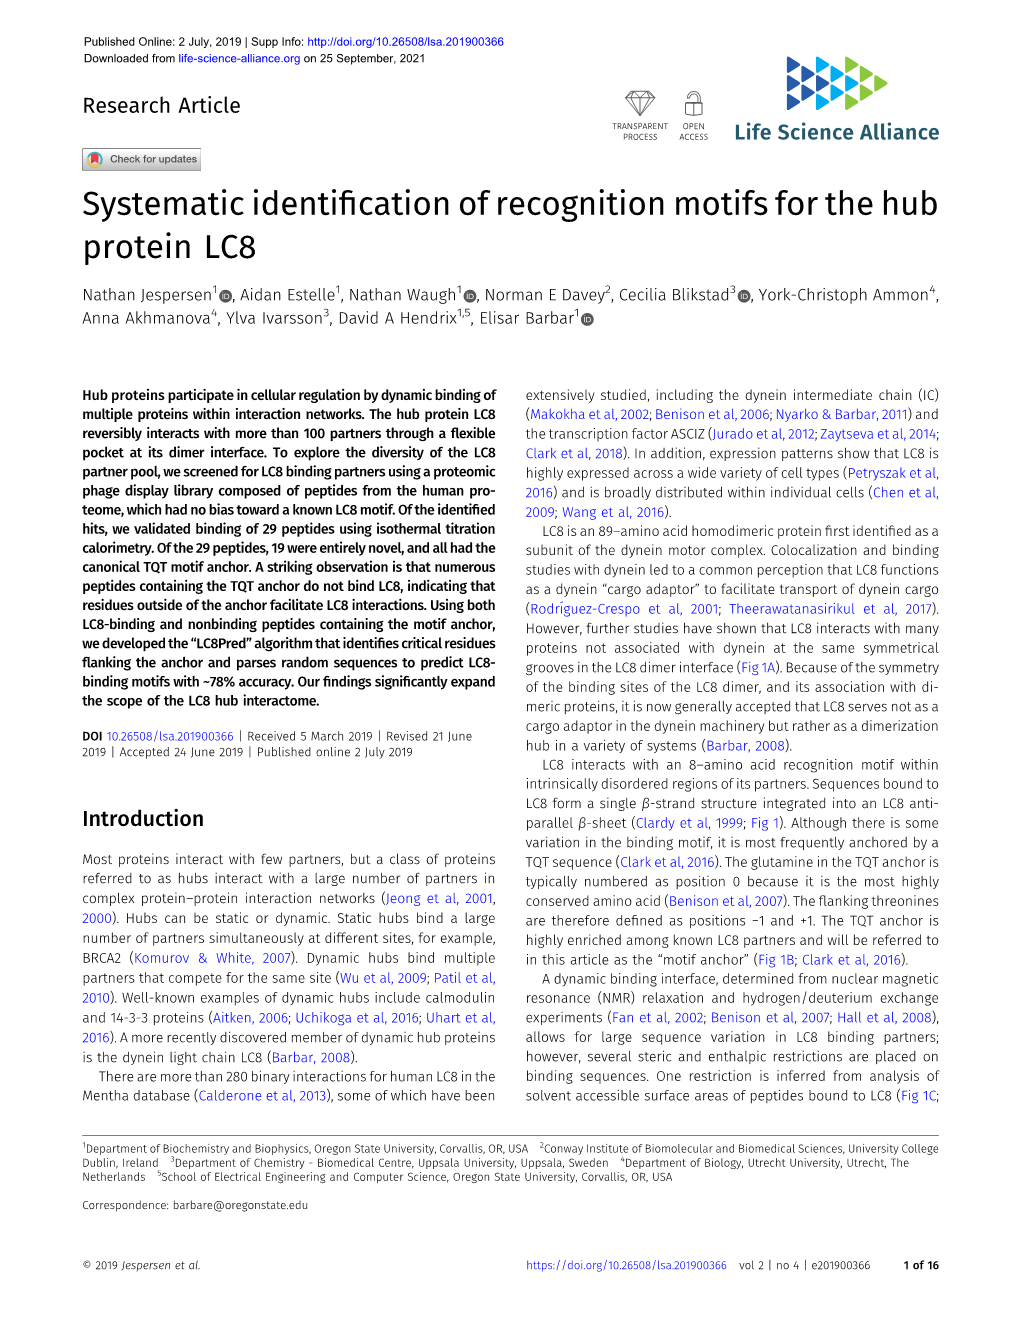 Systematic Identification of Recognition Motifs for the Hub Protein